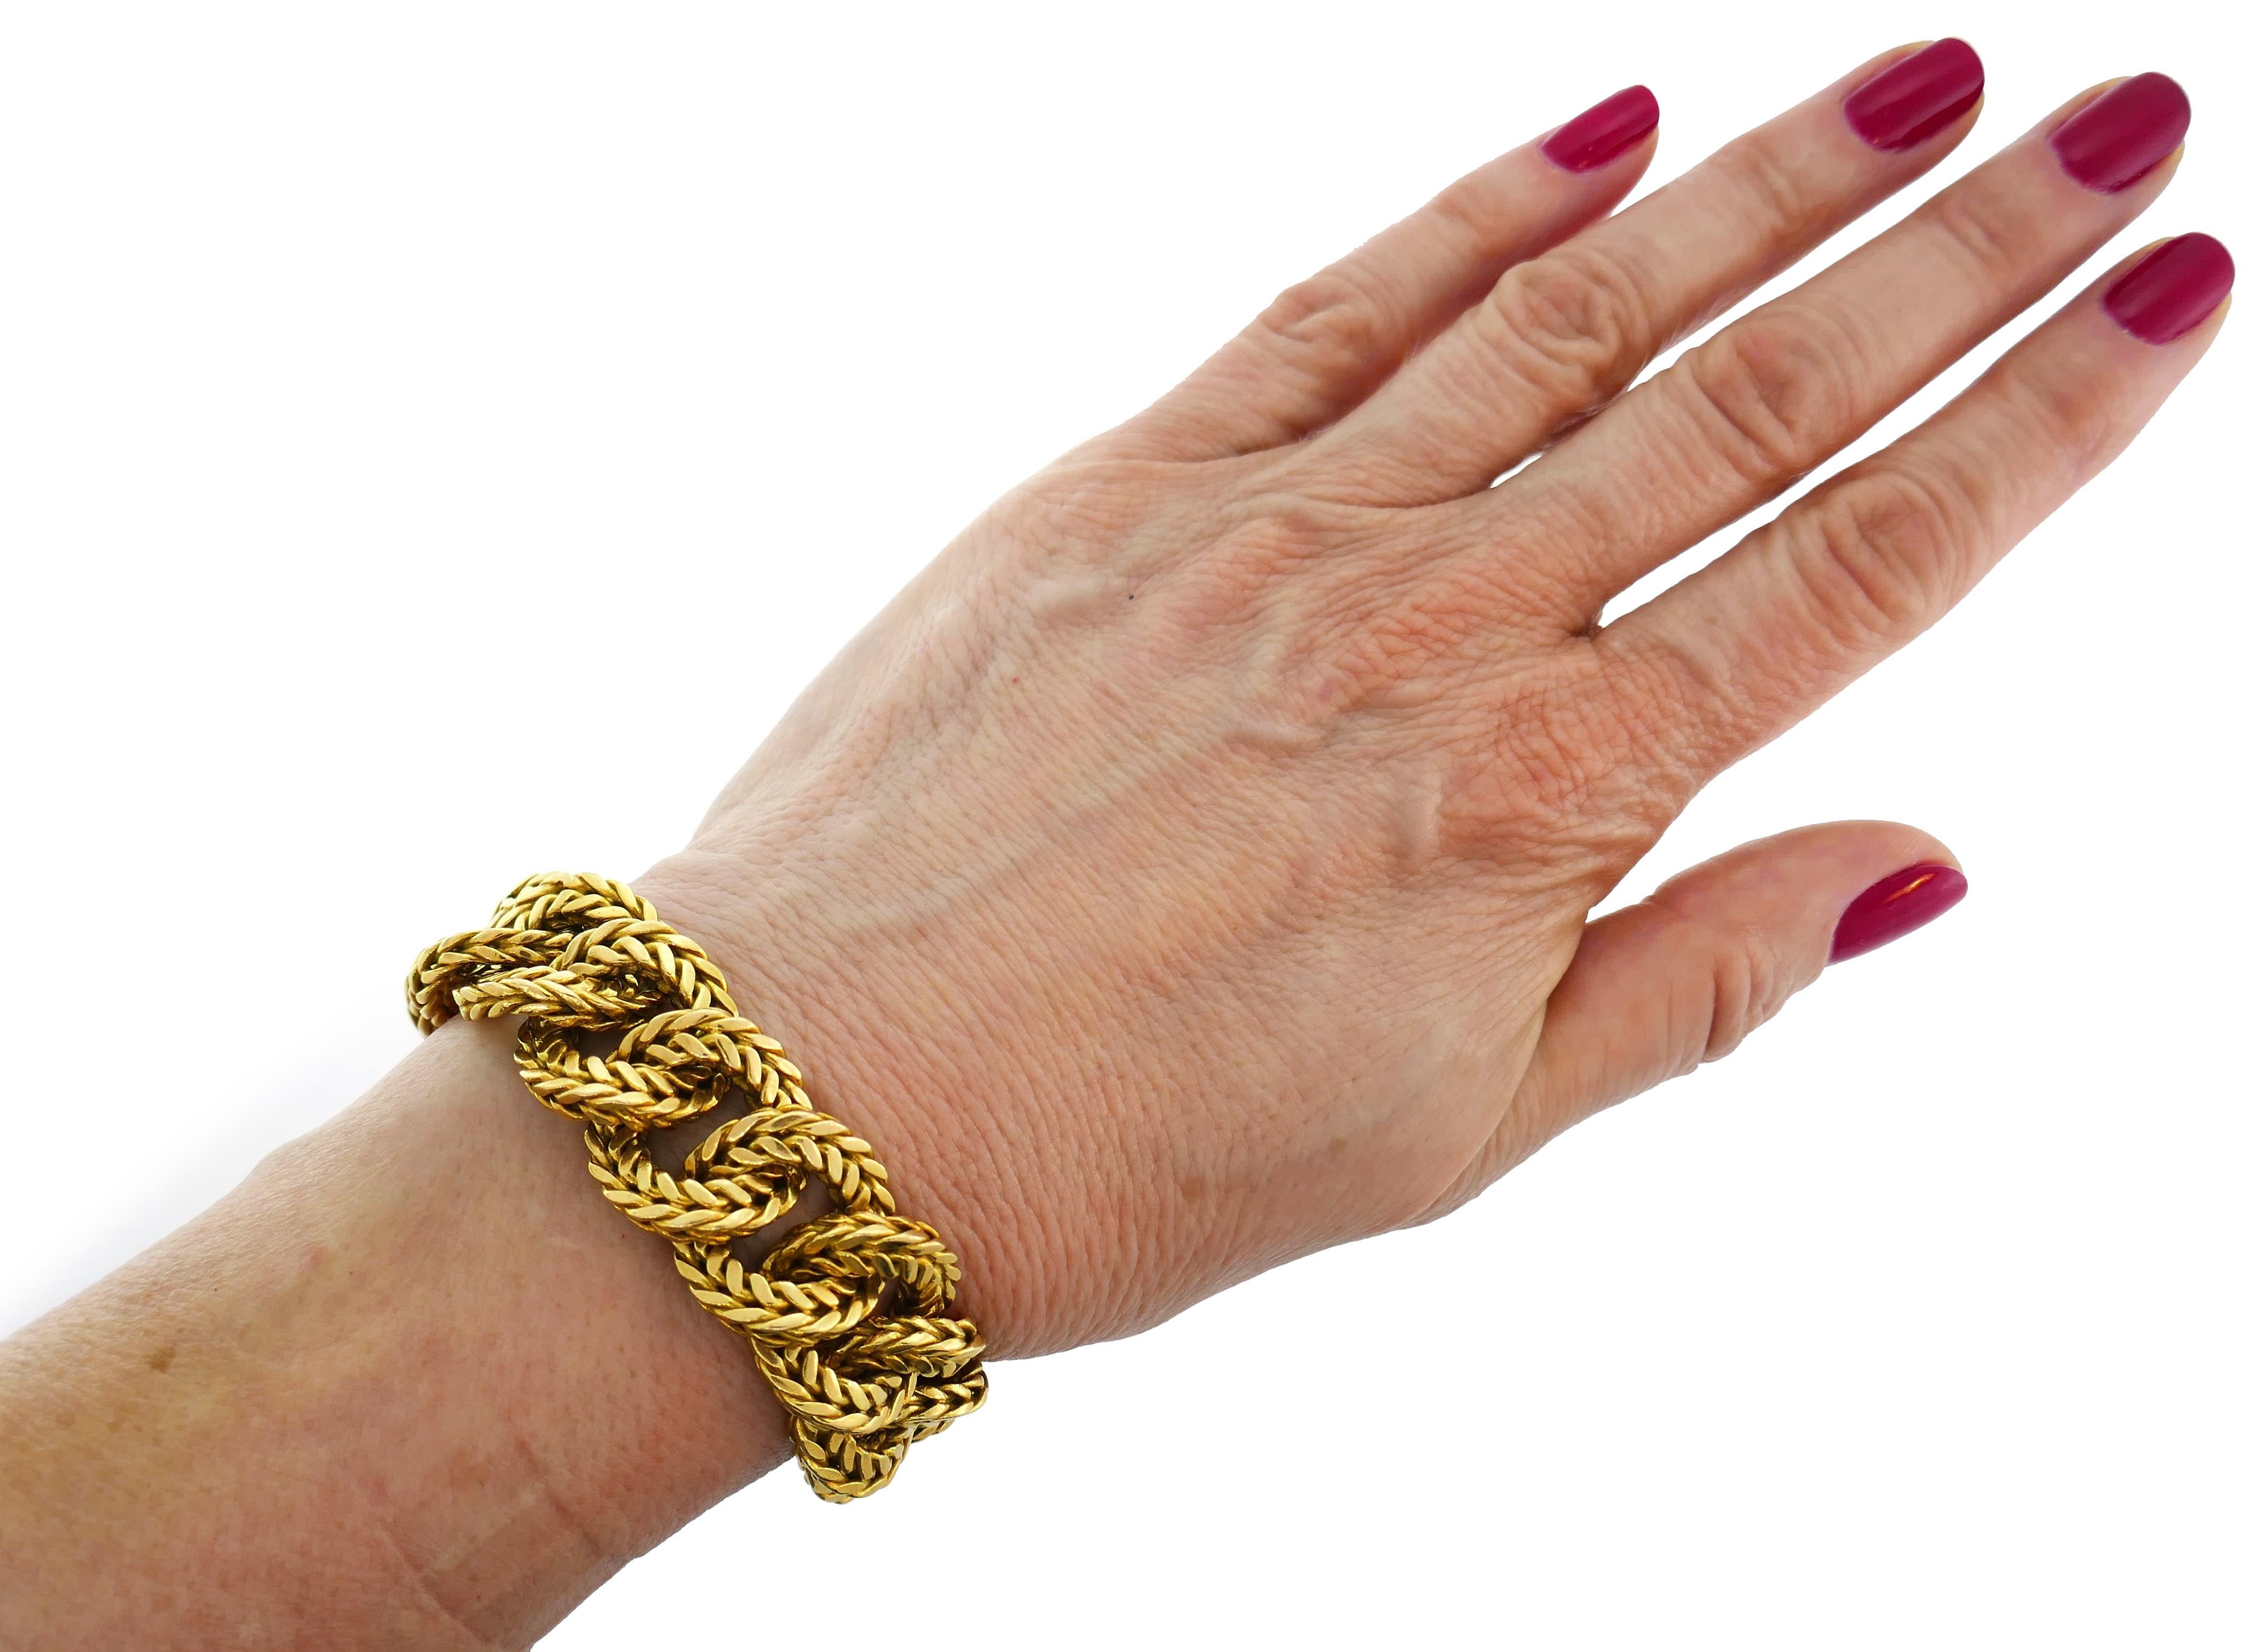 Bold yet elegant bracelet created by Van Cleef & Arpels in France in the 1970s. Timeless and wearable, the bracelet is a great addition to your jewelry collection. 
The bracelet is made of 18 karat yellow gold.
It measures 7 inches x 3/4 inches